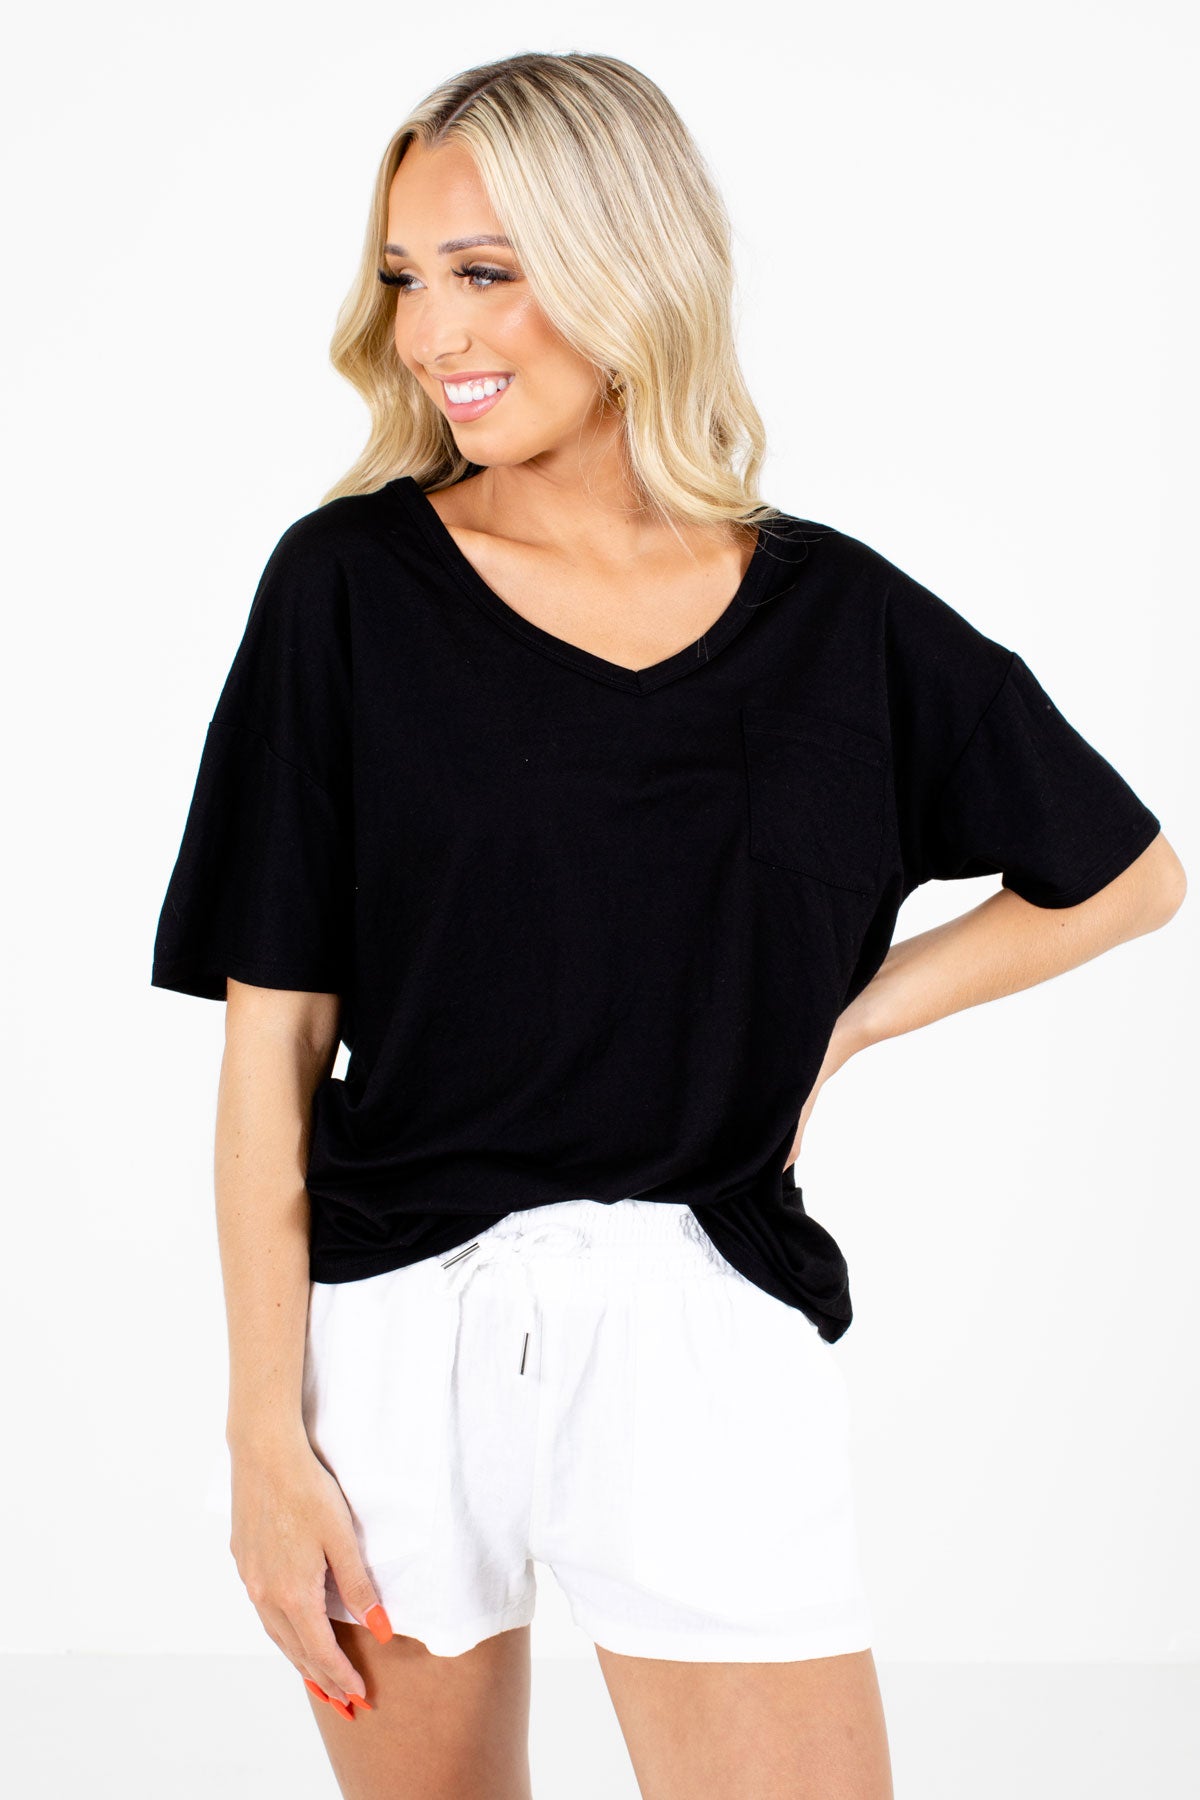 Black Short Sleeve Boutique Tees for Women